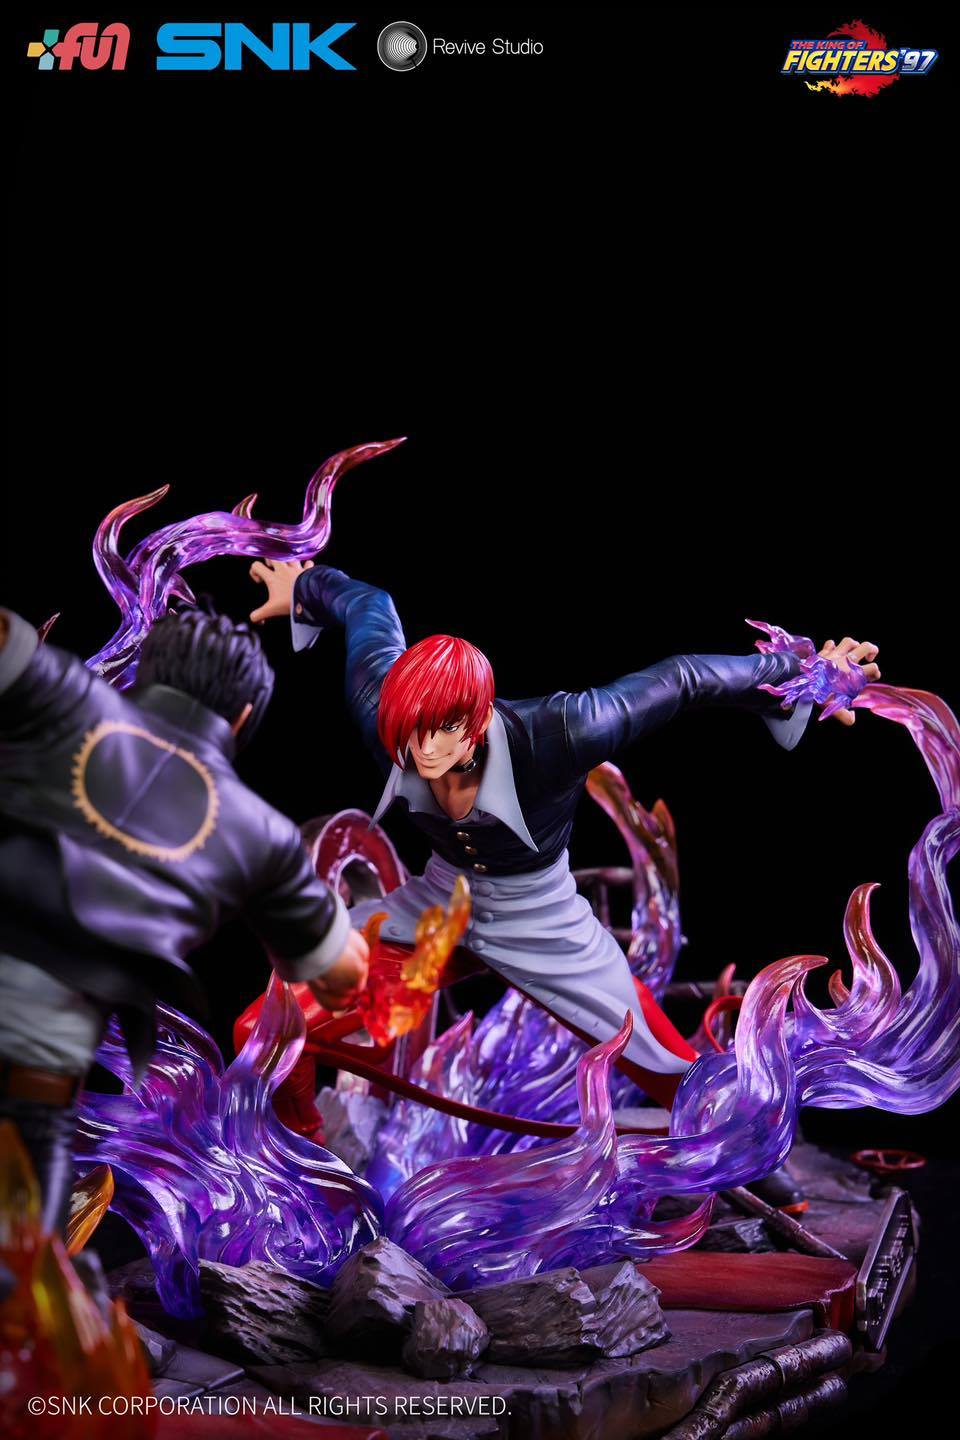 Top 6 Iori Yagami Quotes: Famous Quotes & Sayings About Iori Yagami